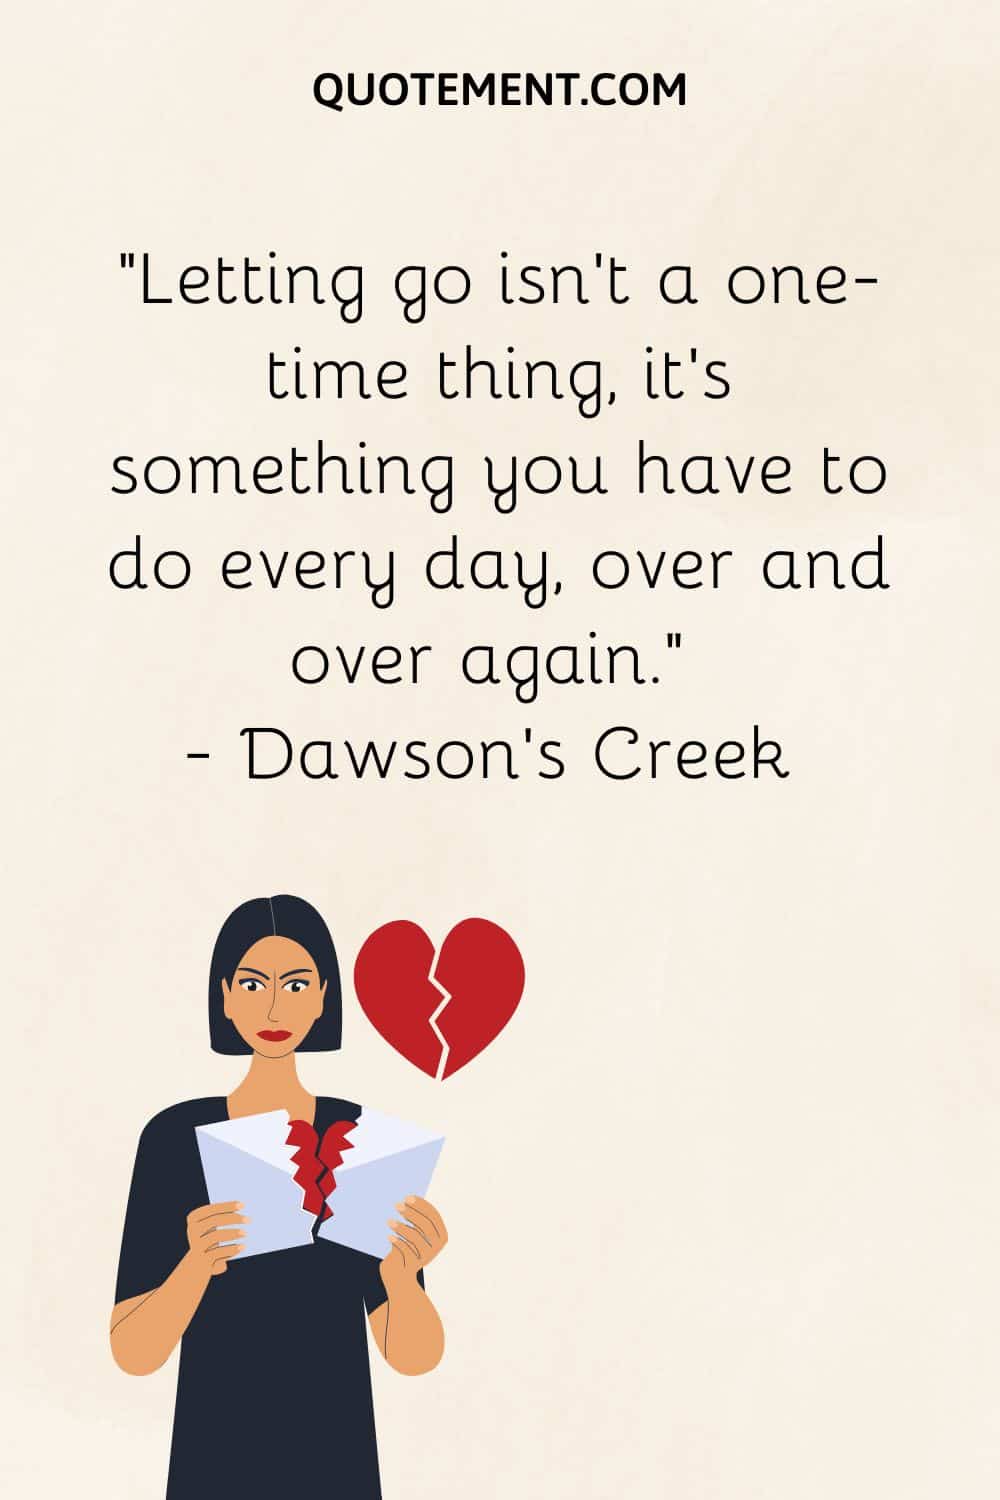 Letting go isn’t a one-time thing, it’s something you have to do every day, over and over again